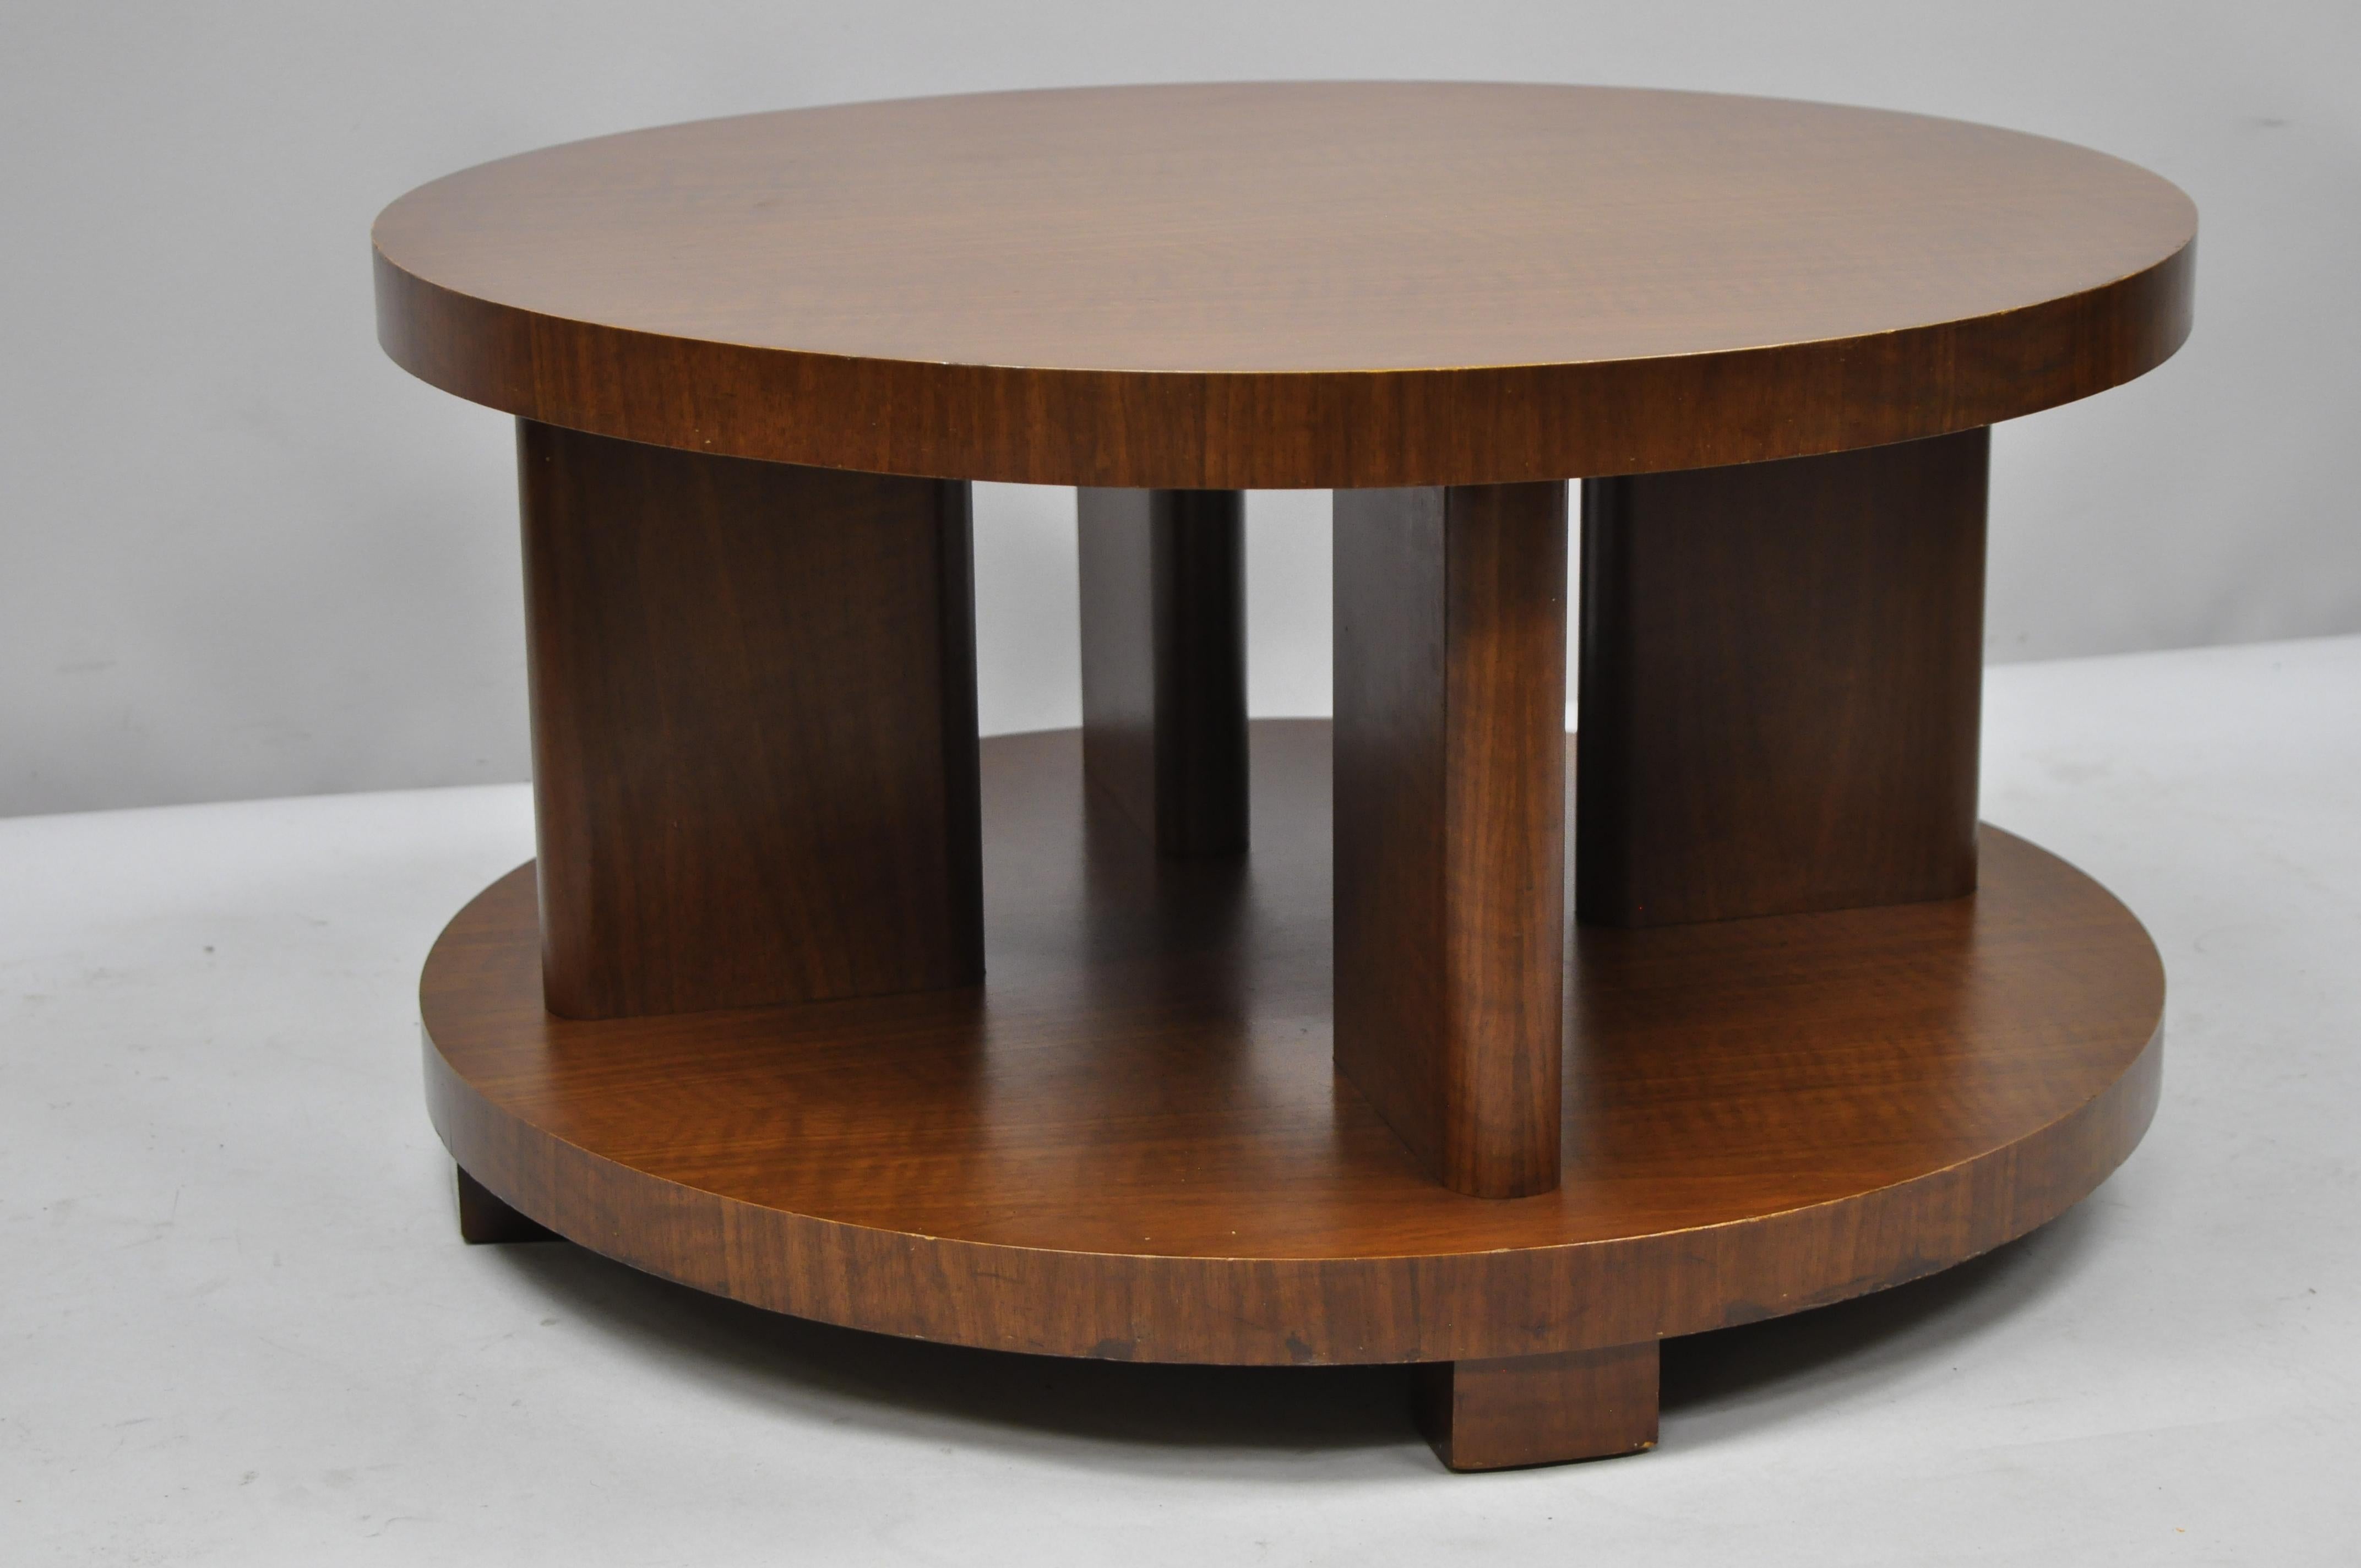 Vintage Art Deco French round mahogany 3-piece coffee end tables After Gilbert Rohde. (3) piece set (2) end tables (1) small round coffee table, multiple tiers, wood construction, beautiful wood grain, quality craftsmanship, great style and form,